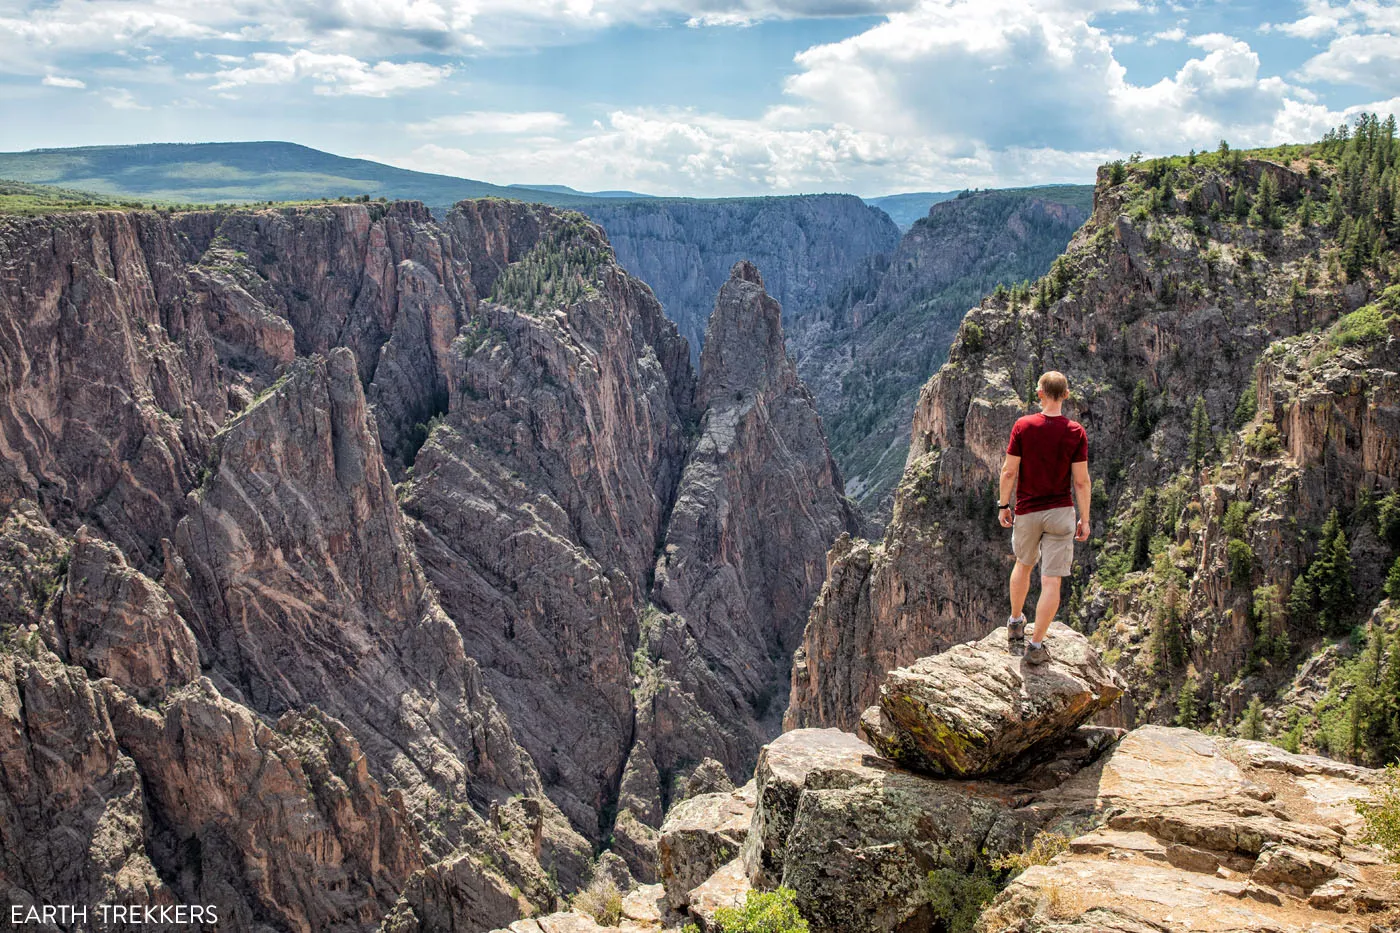 How to Visit Black Canyon